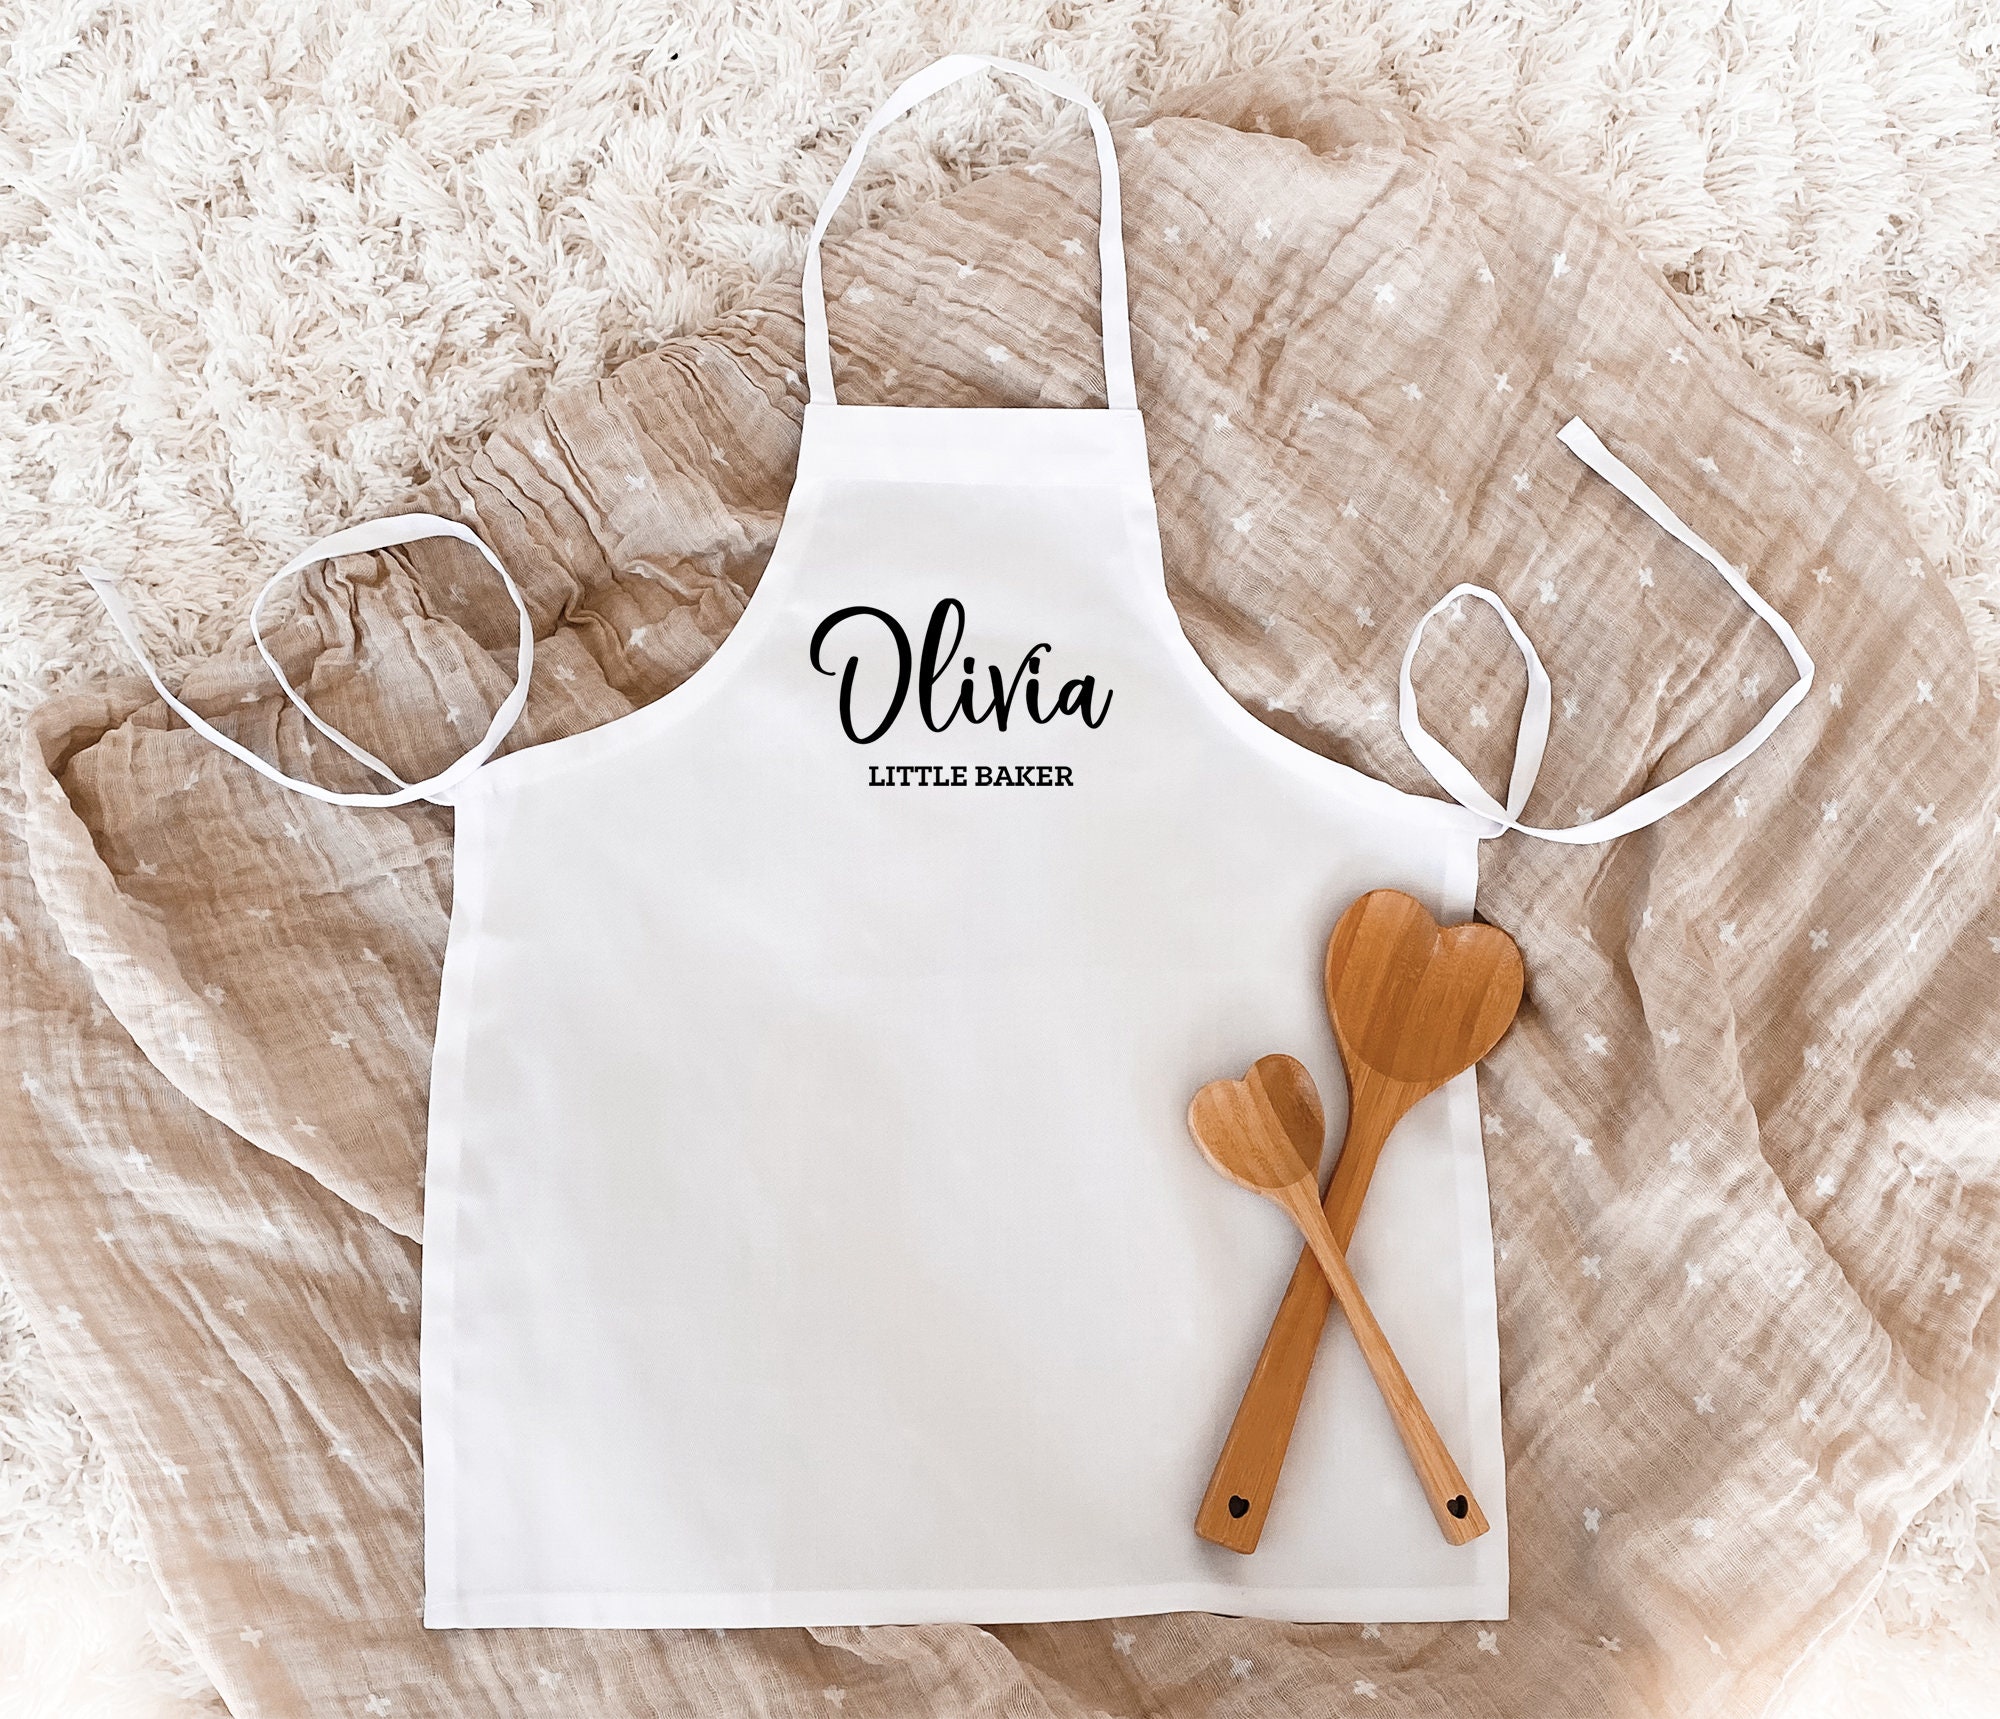 Personalization Mall - Our adorable new Mommy and Me Aprons can be